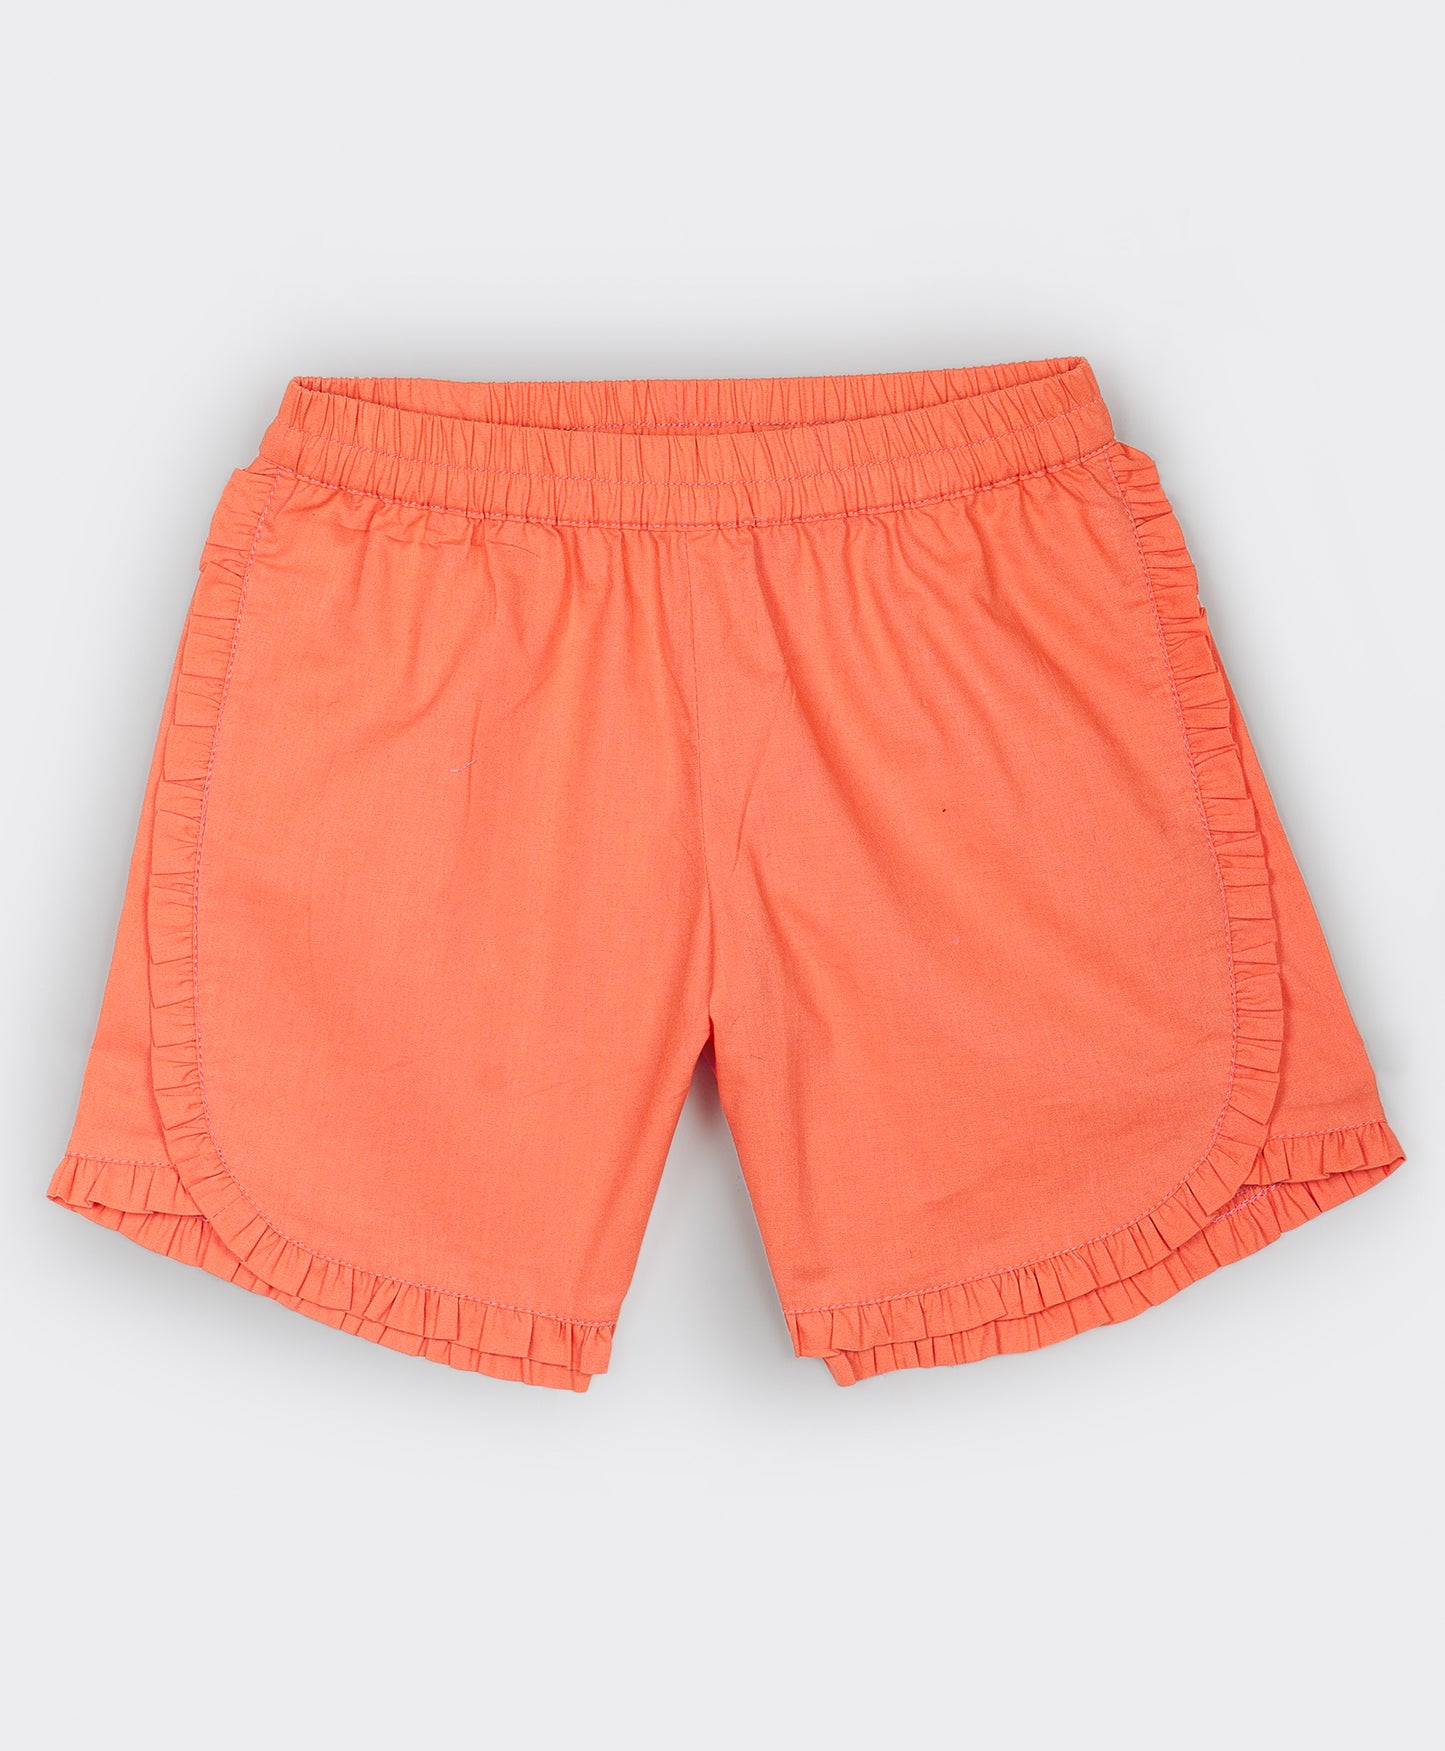 Orange shorts with frill detailing on the seams and bottom